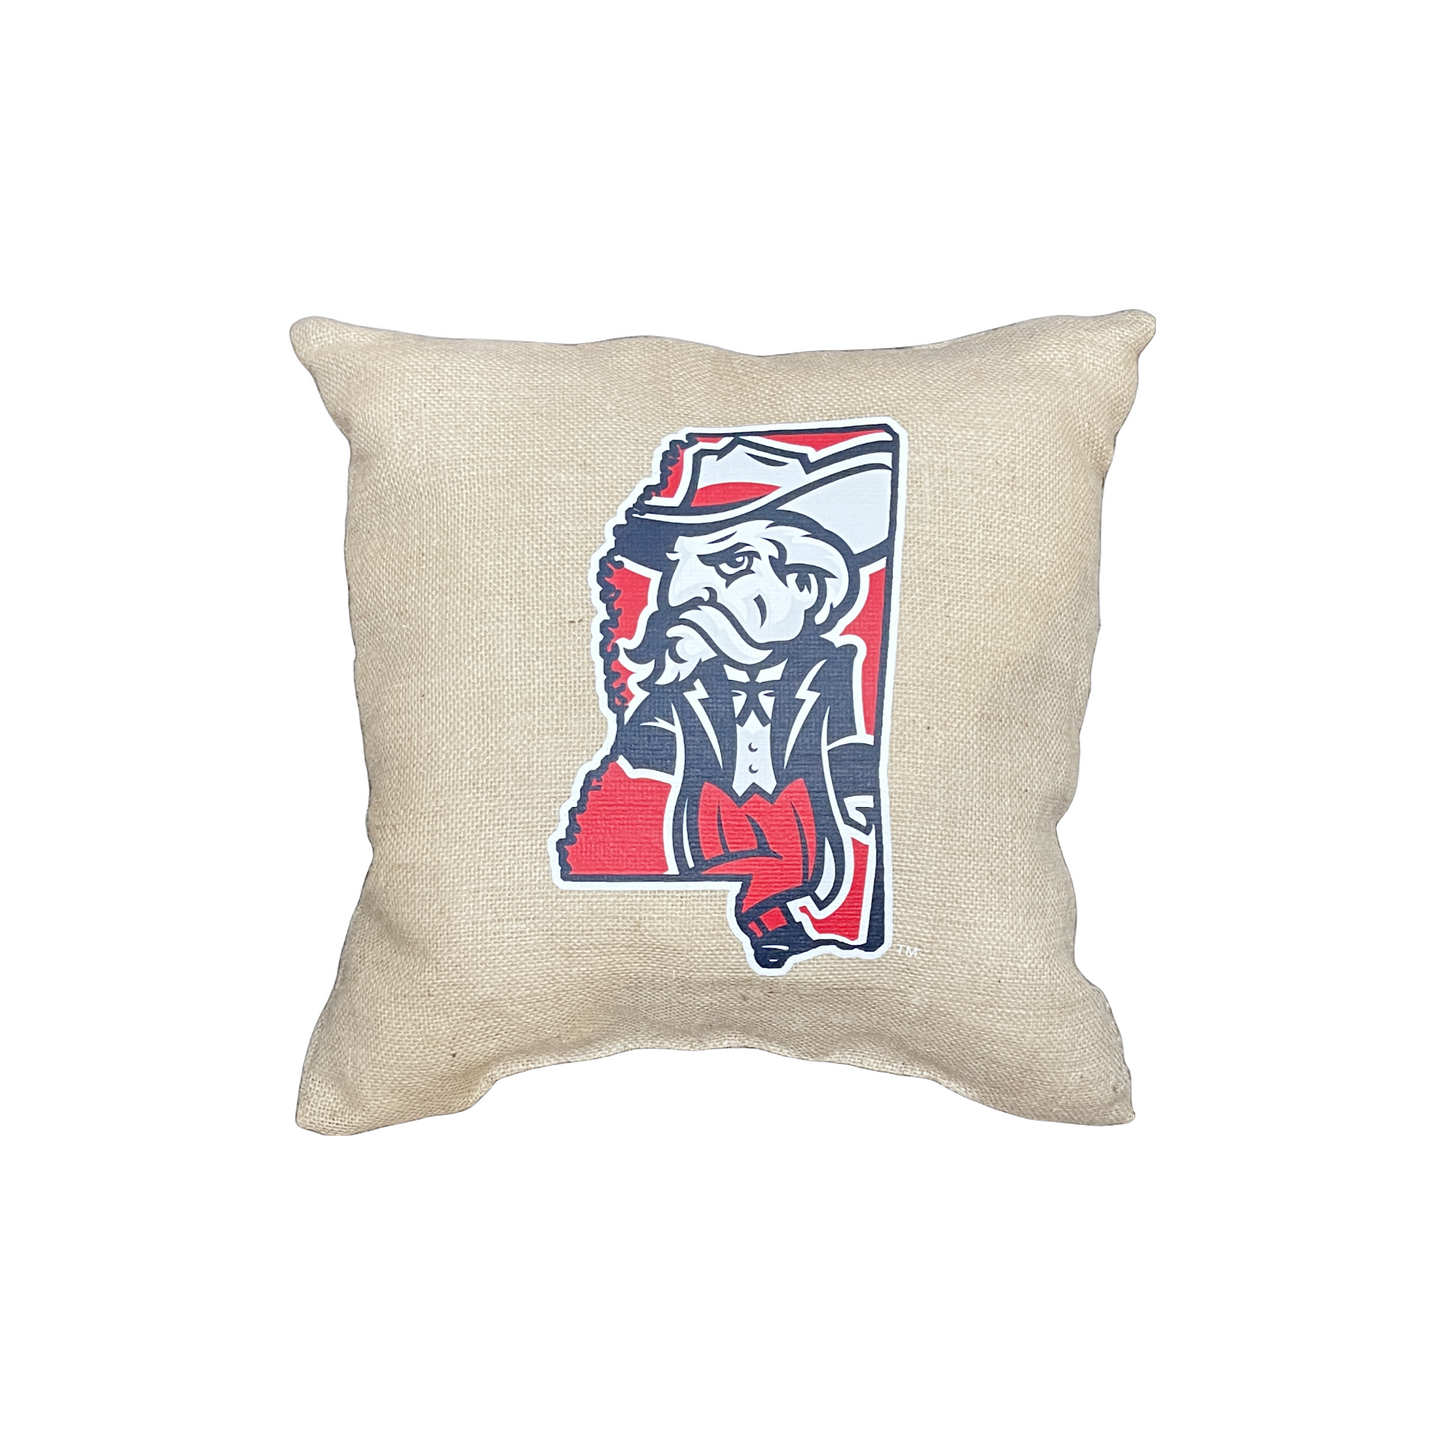 Colonel Reb in State of MS Square Burlap Pillow